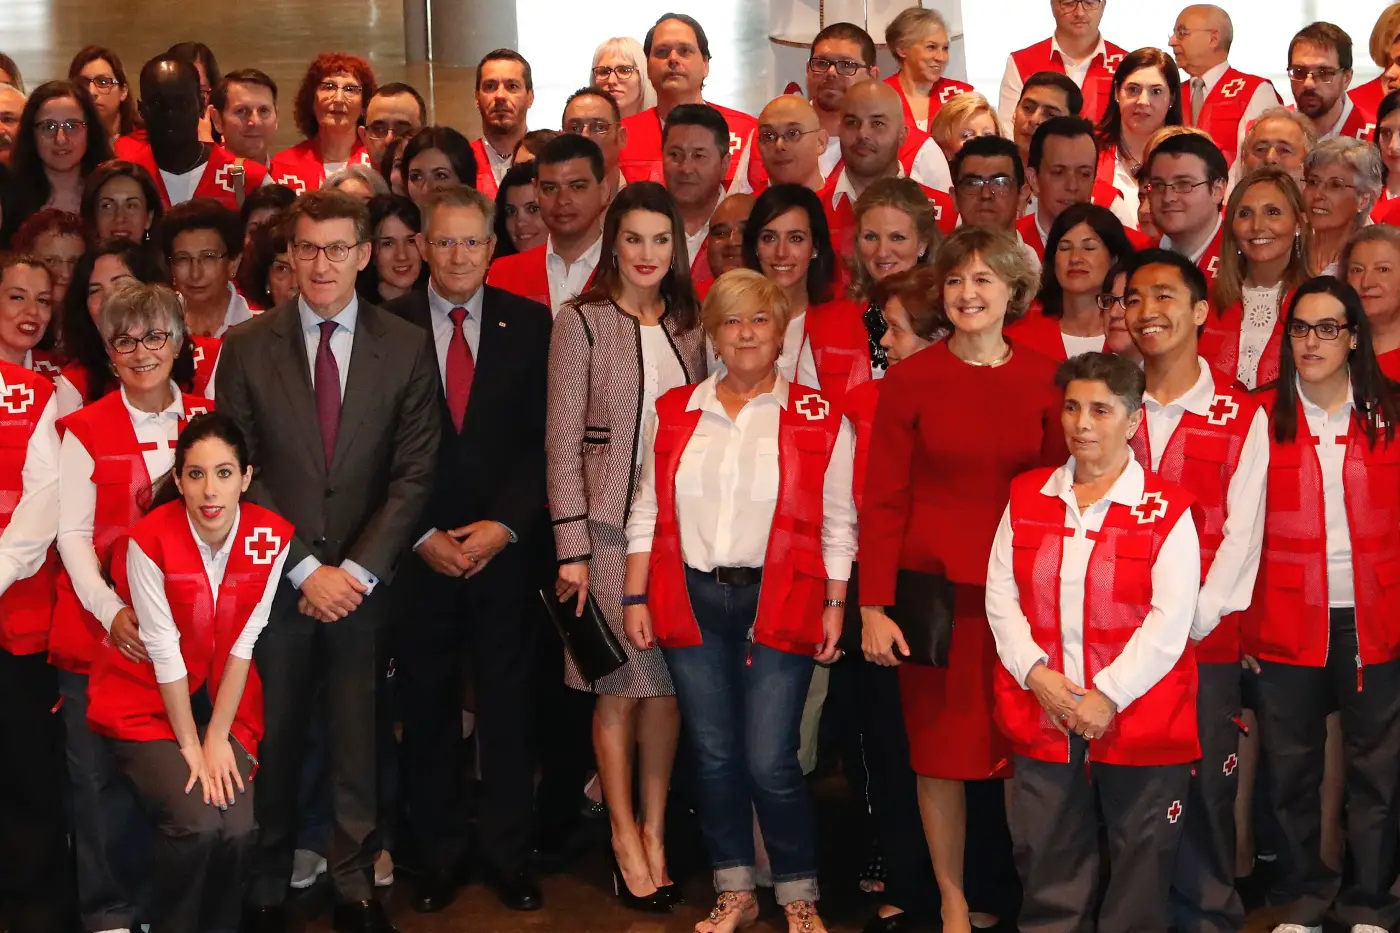 A tweedy Red Cross Day for Queen Letizia